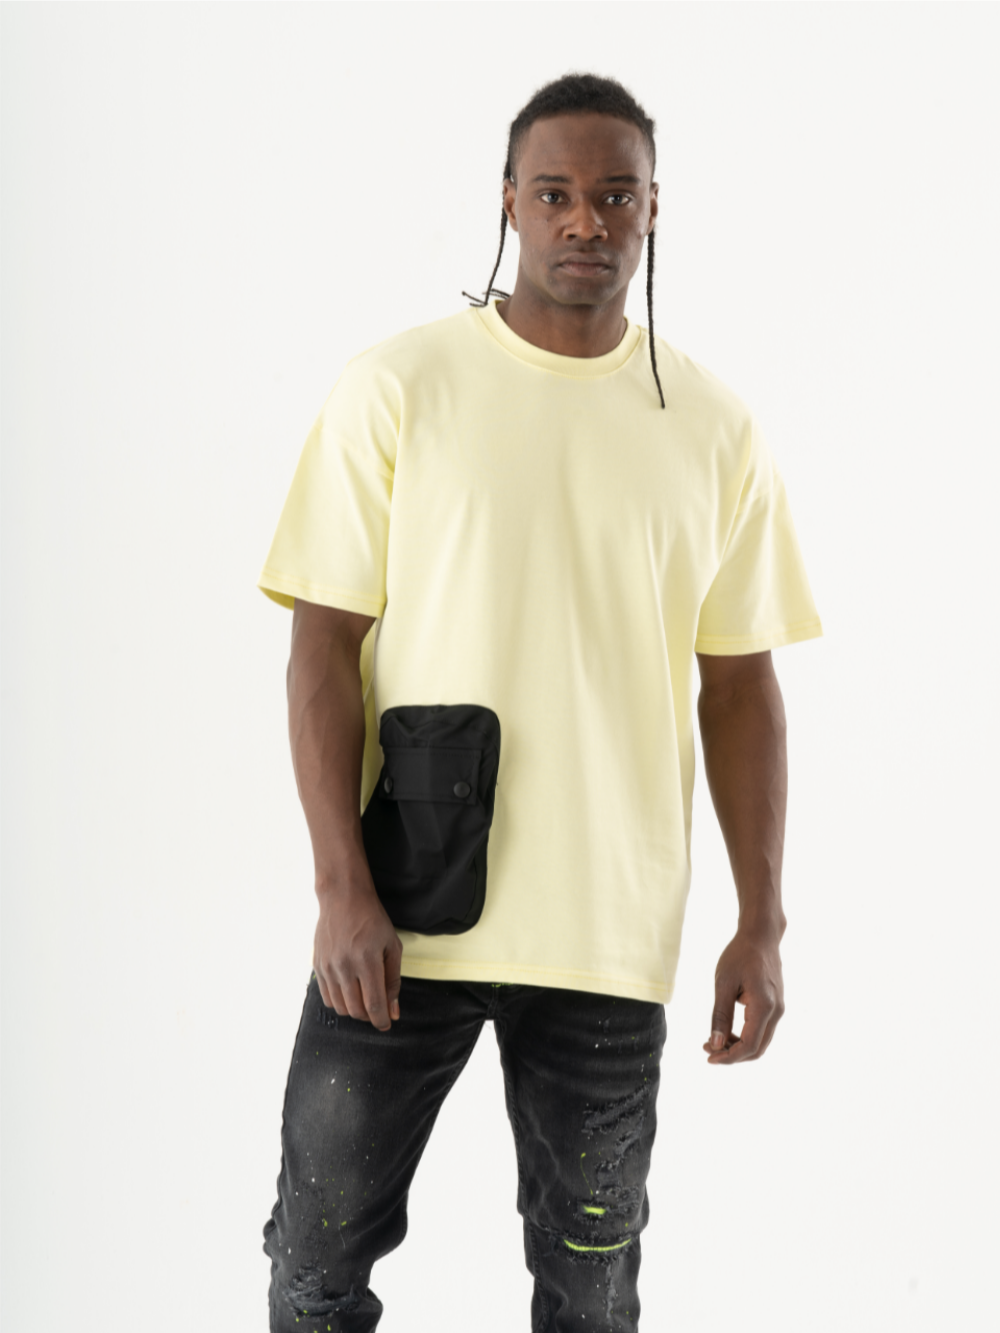 A man displaying a casual look with a SUNRAY T-SHIRT featuring a black pocket.